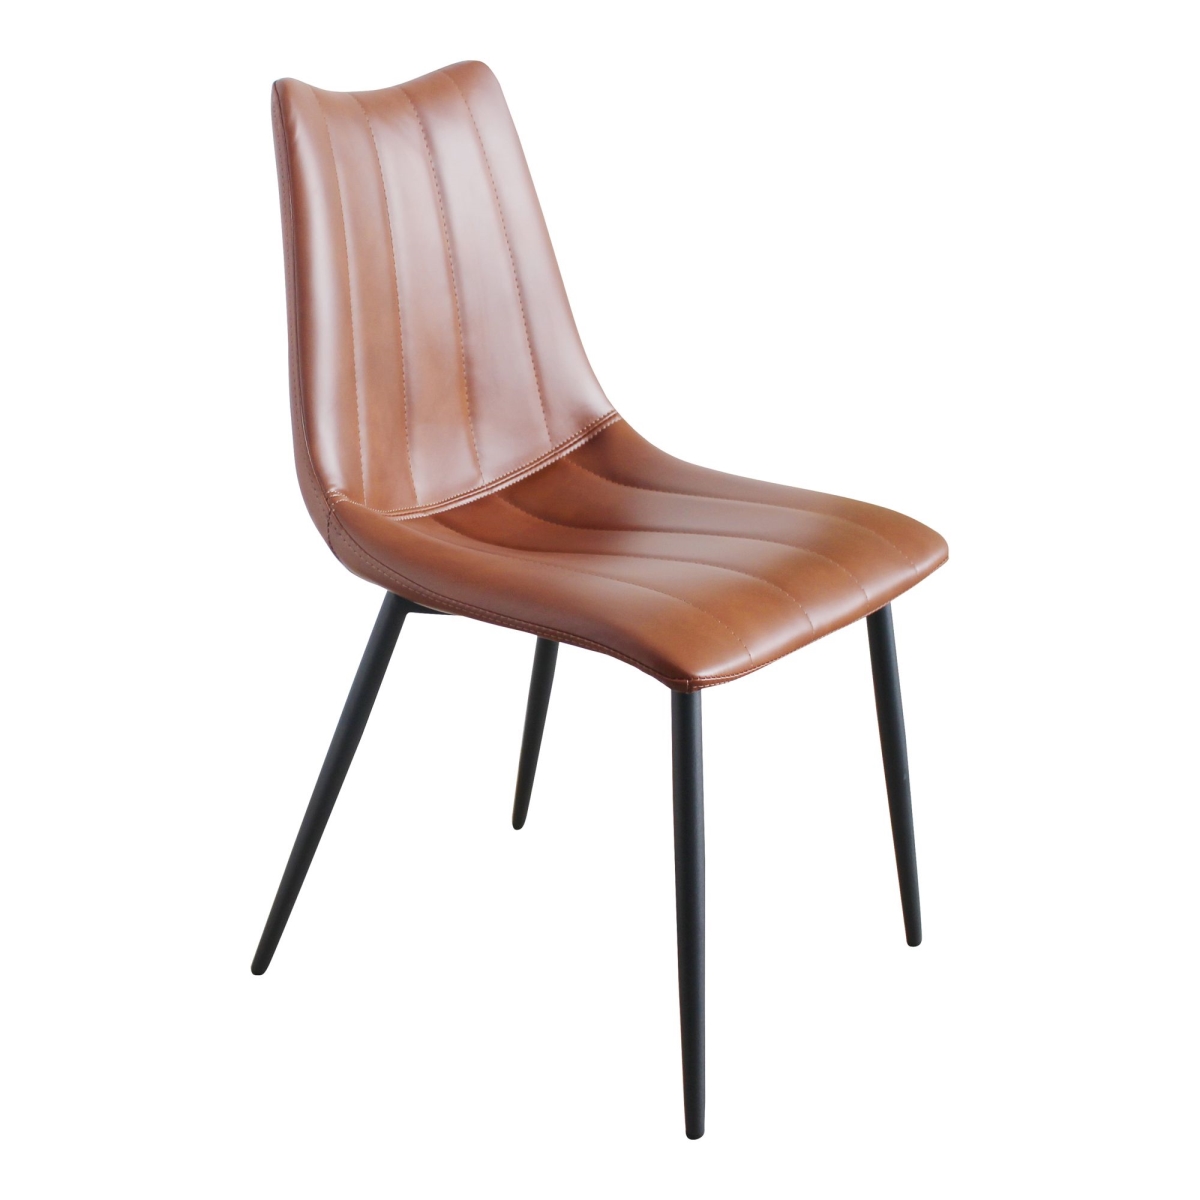 Uu-1022-03 Alibi Dining Chair, Leatherette, Brown - 18 X 22.5 X 33 In. - Set Of 2